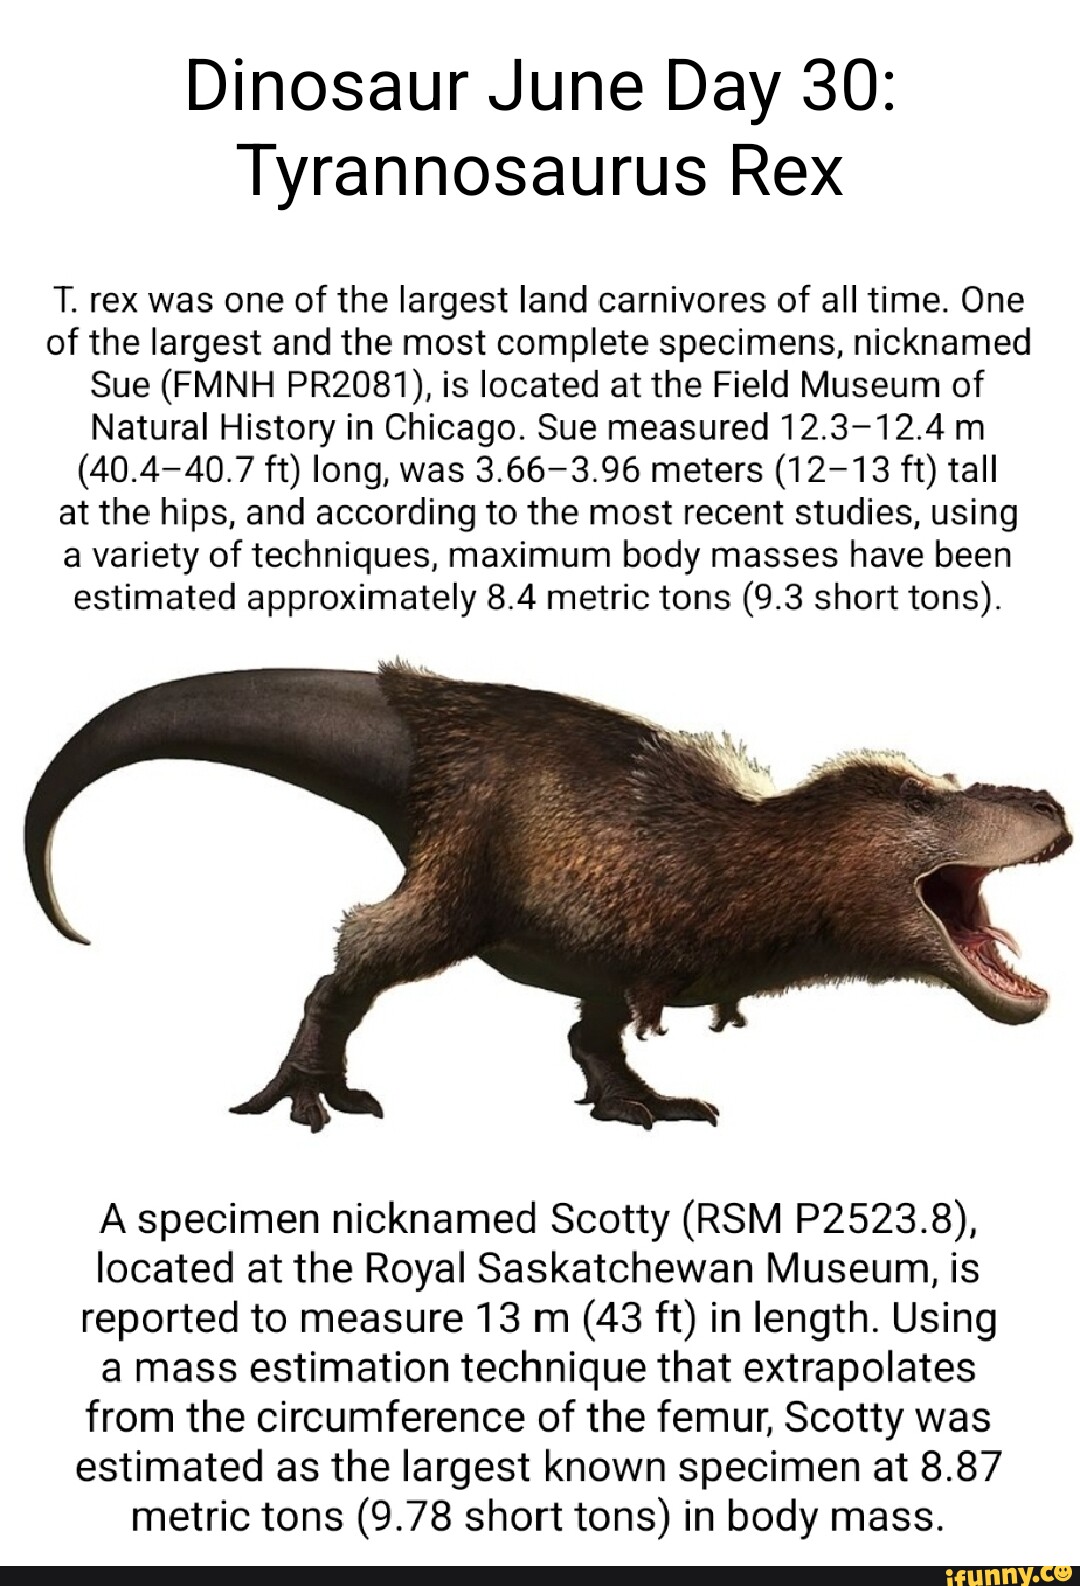 Horse-size T. rex probably not real, says dream-crushing study - CNET